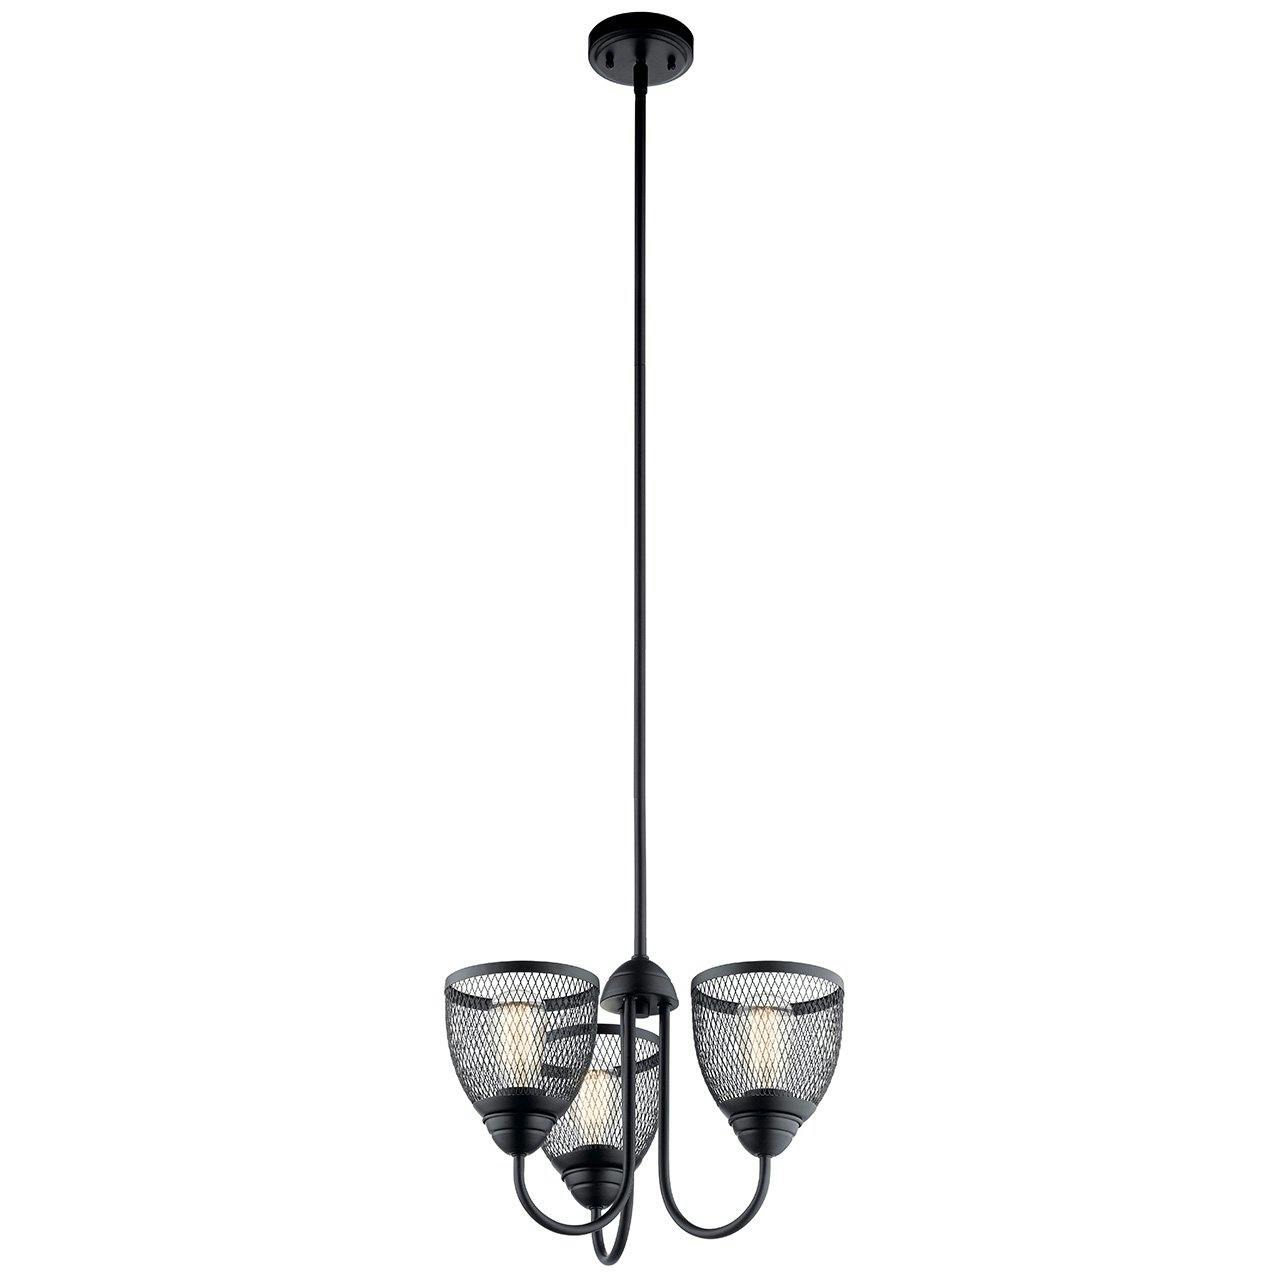 Voclain 12" Convertible Chandelier Black on a white background